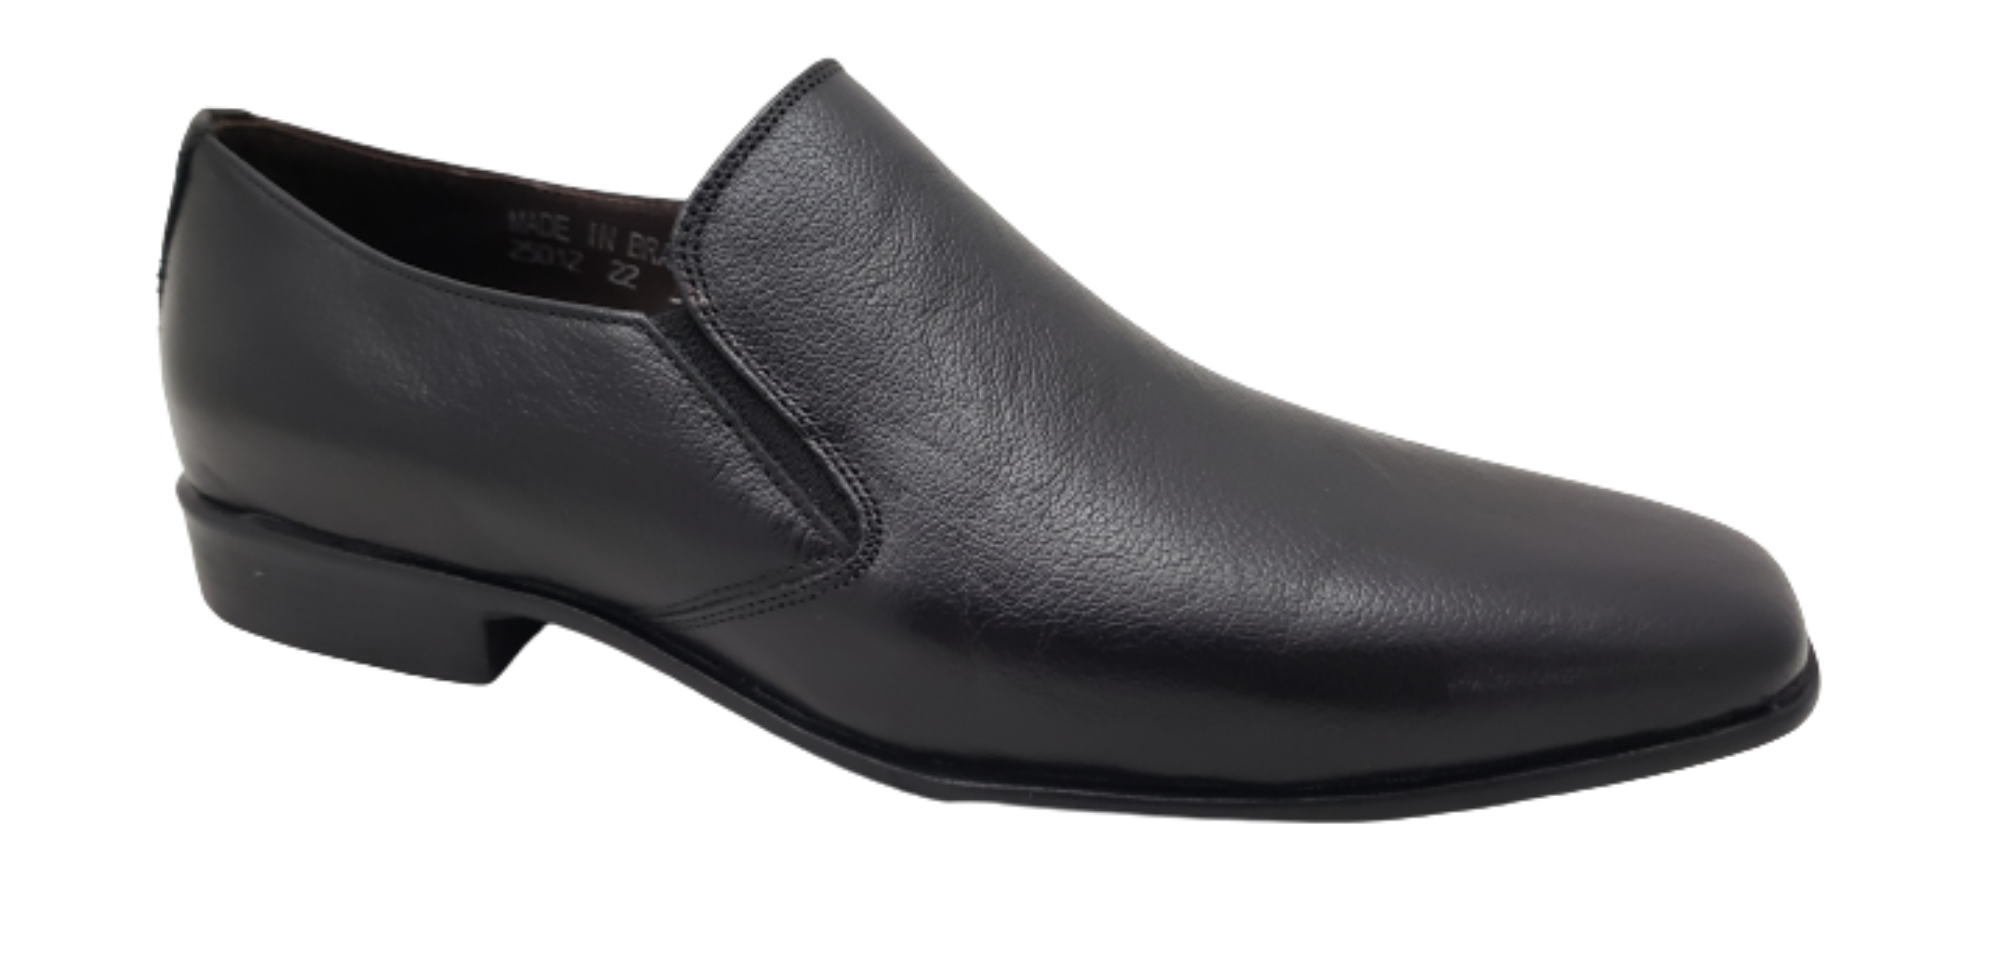 ALFREDO MEN'S BLACK DRESS SLIP ON SHOES WITH RUBBER SOLE - 25012R